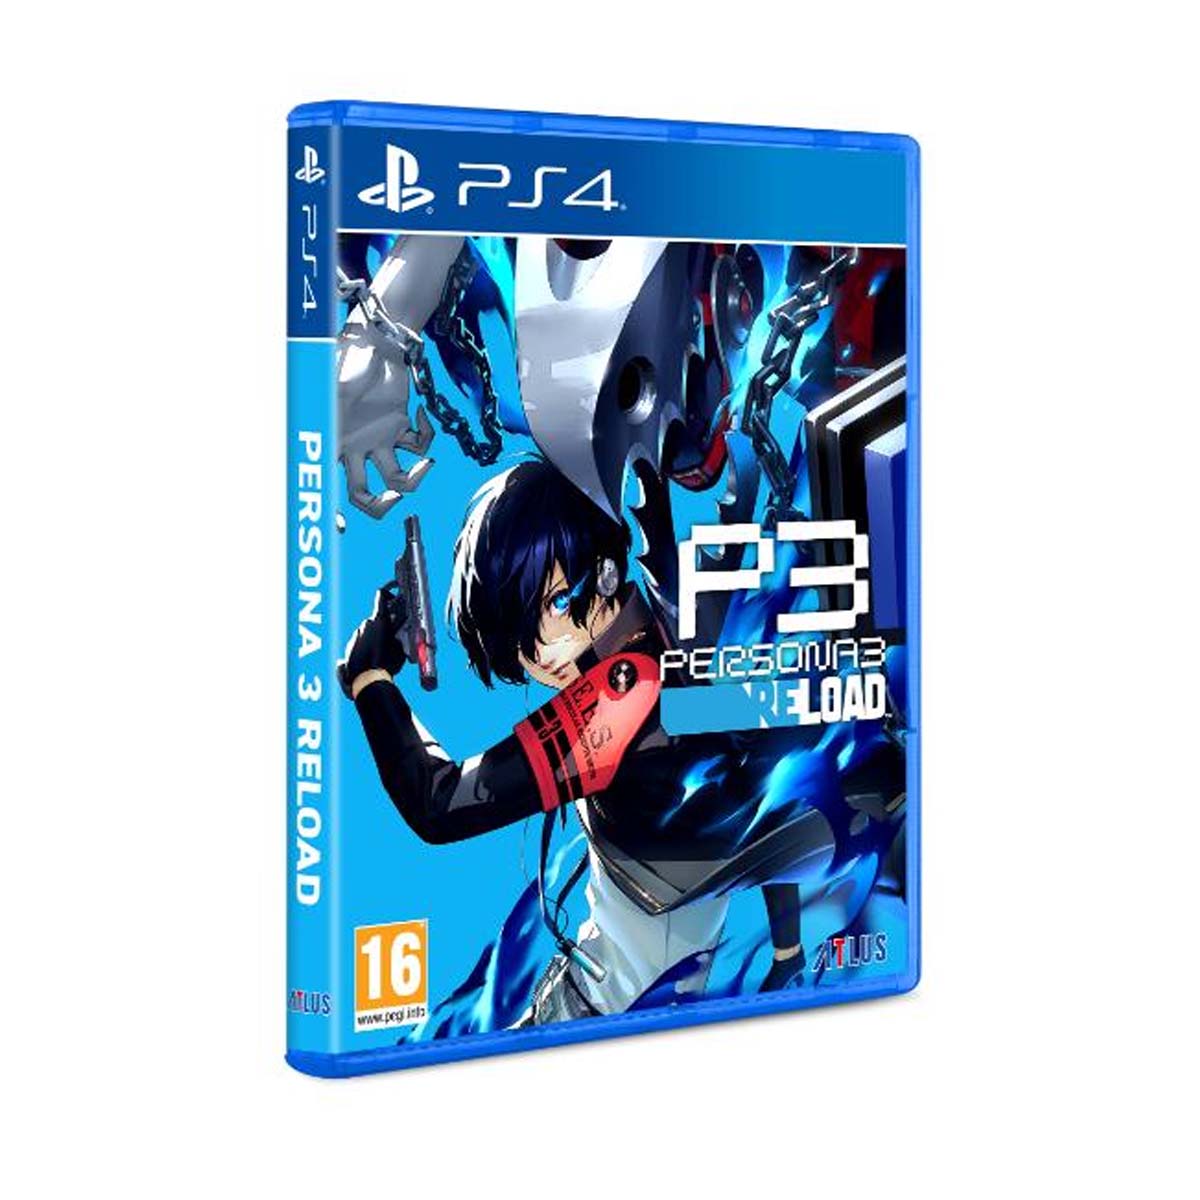 Buy Persona 3 Reload - PlayStation 4 PS4 - ShopTo.net